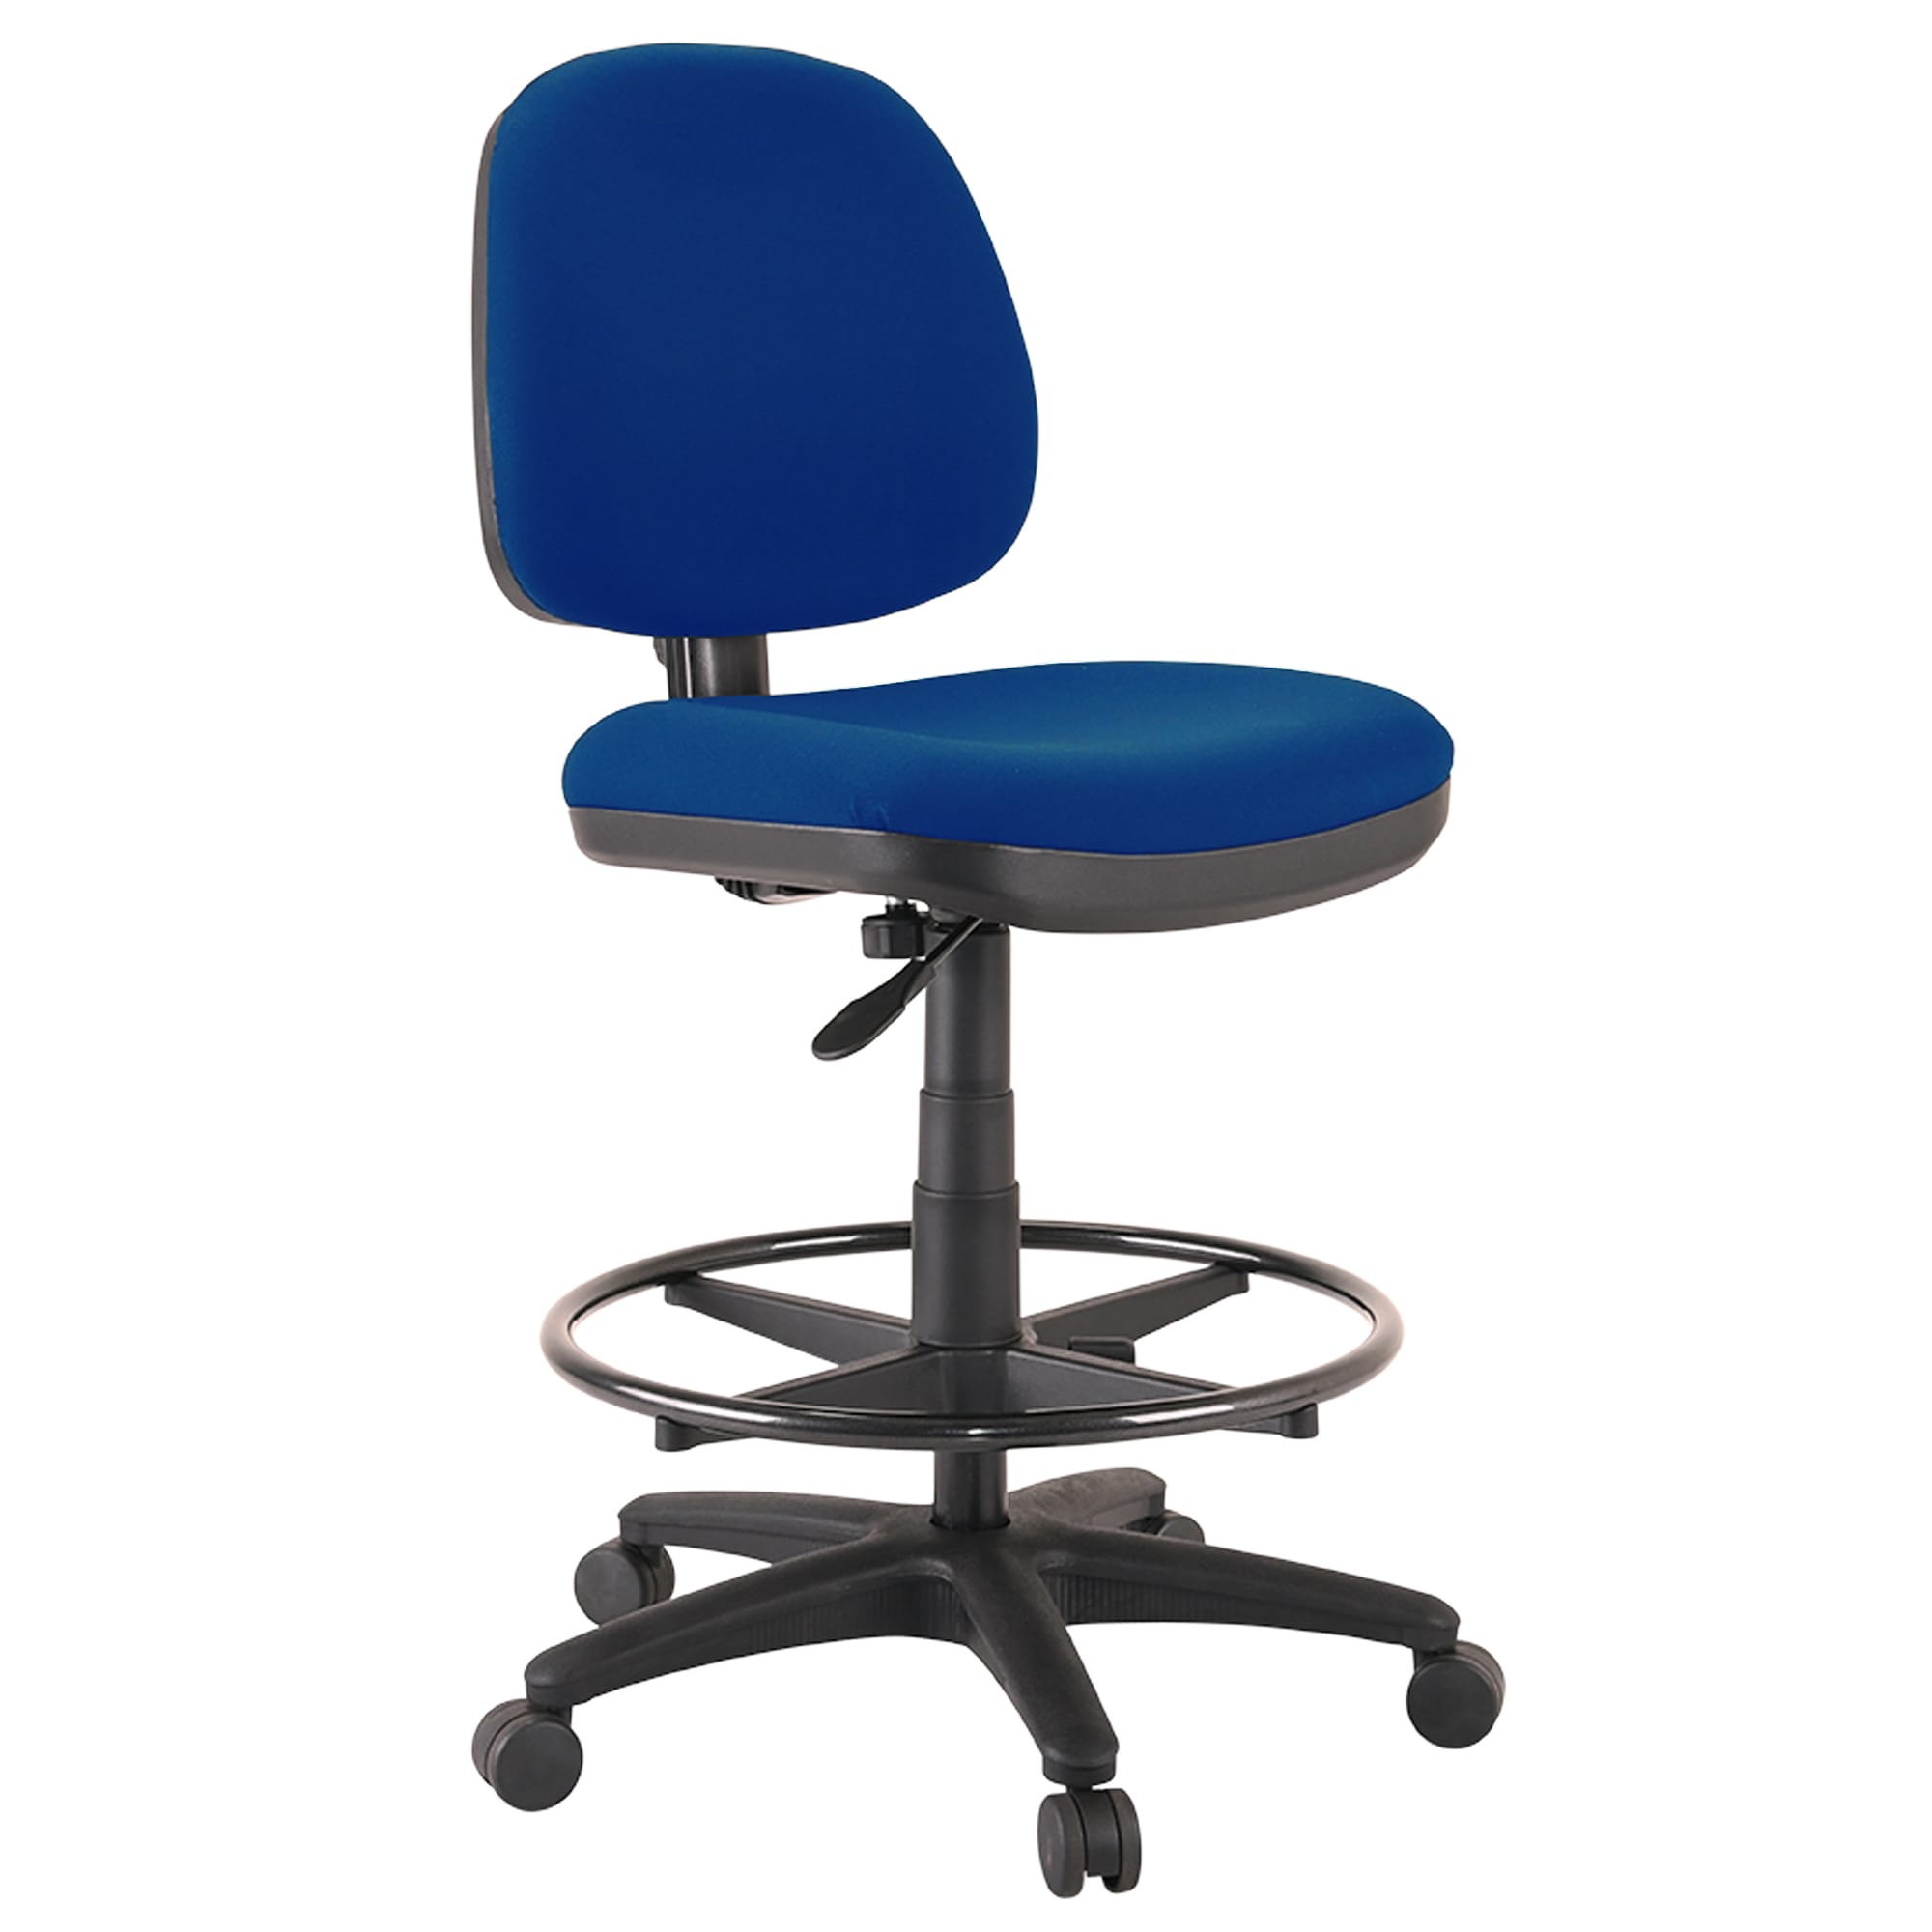 Buro Image architectural chair in blue front angle